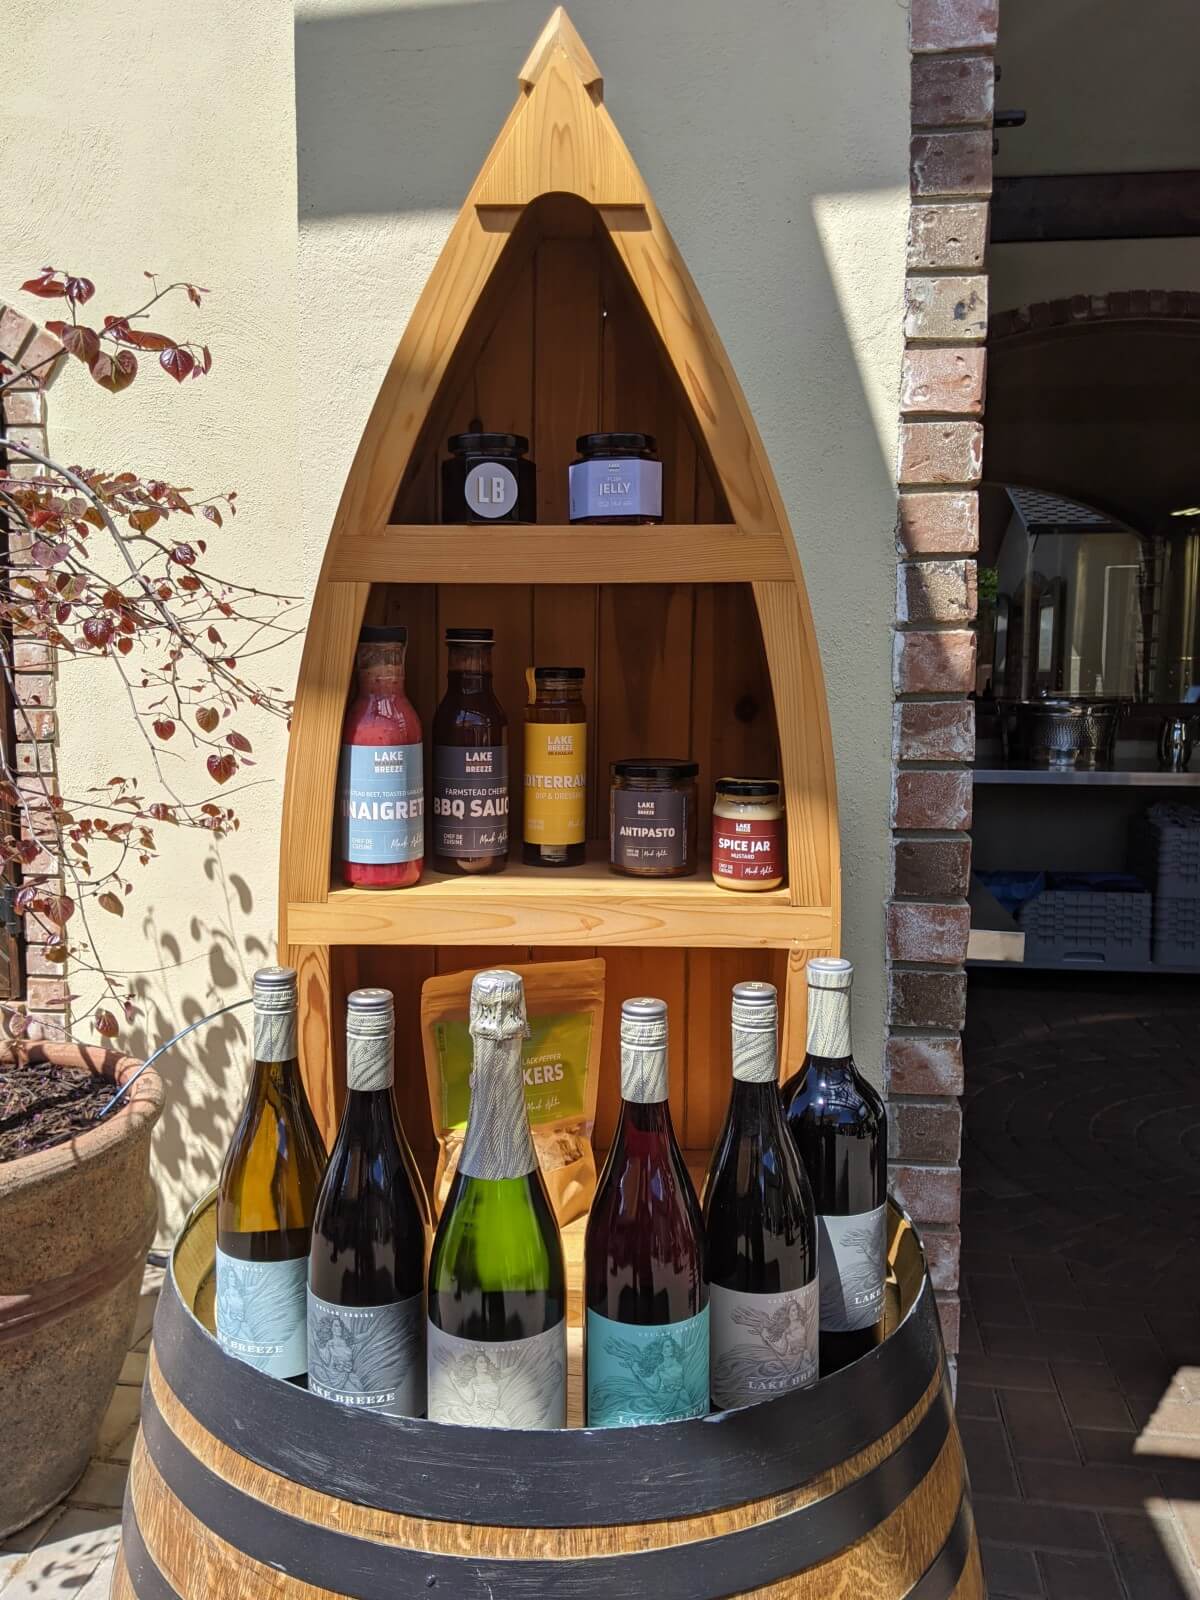 Six full bottles of Lake Breeze wine sit on top of a wine barrel, with shelving behind with jarred conserves and sauces